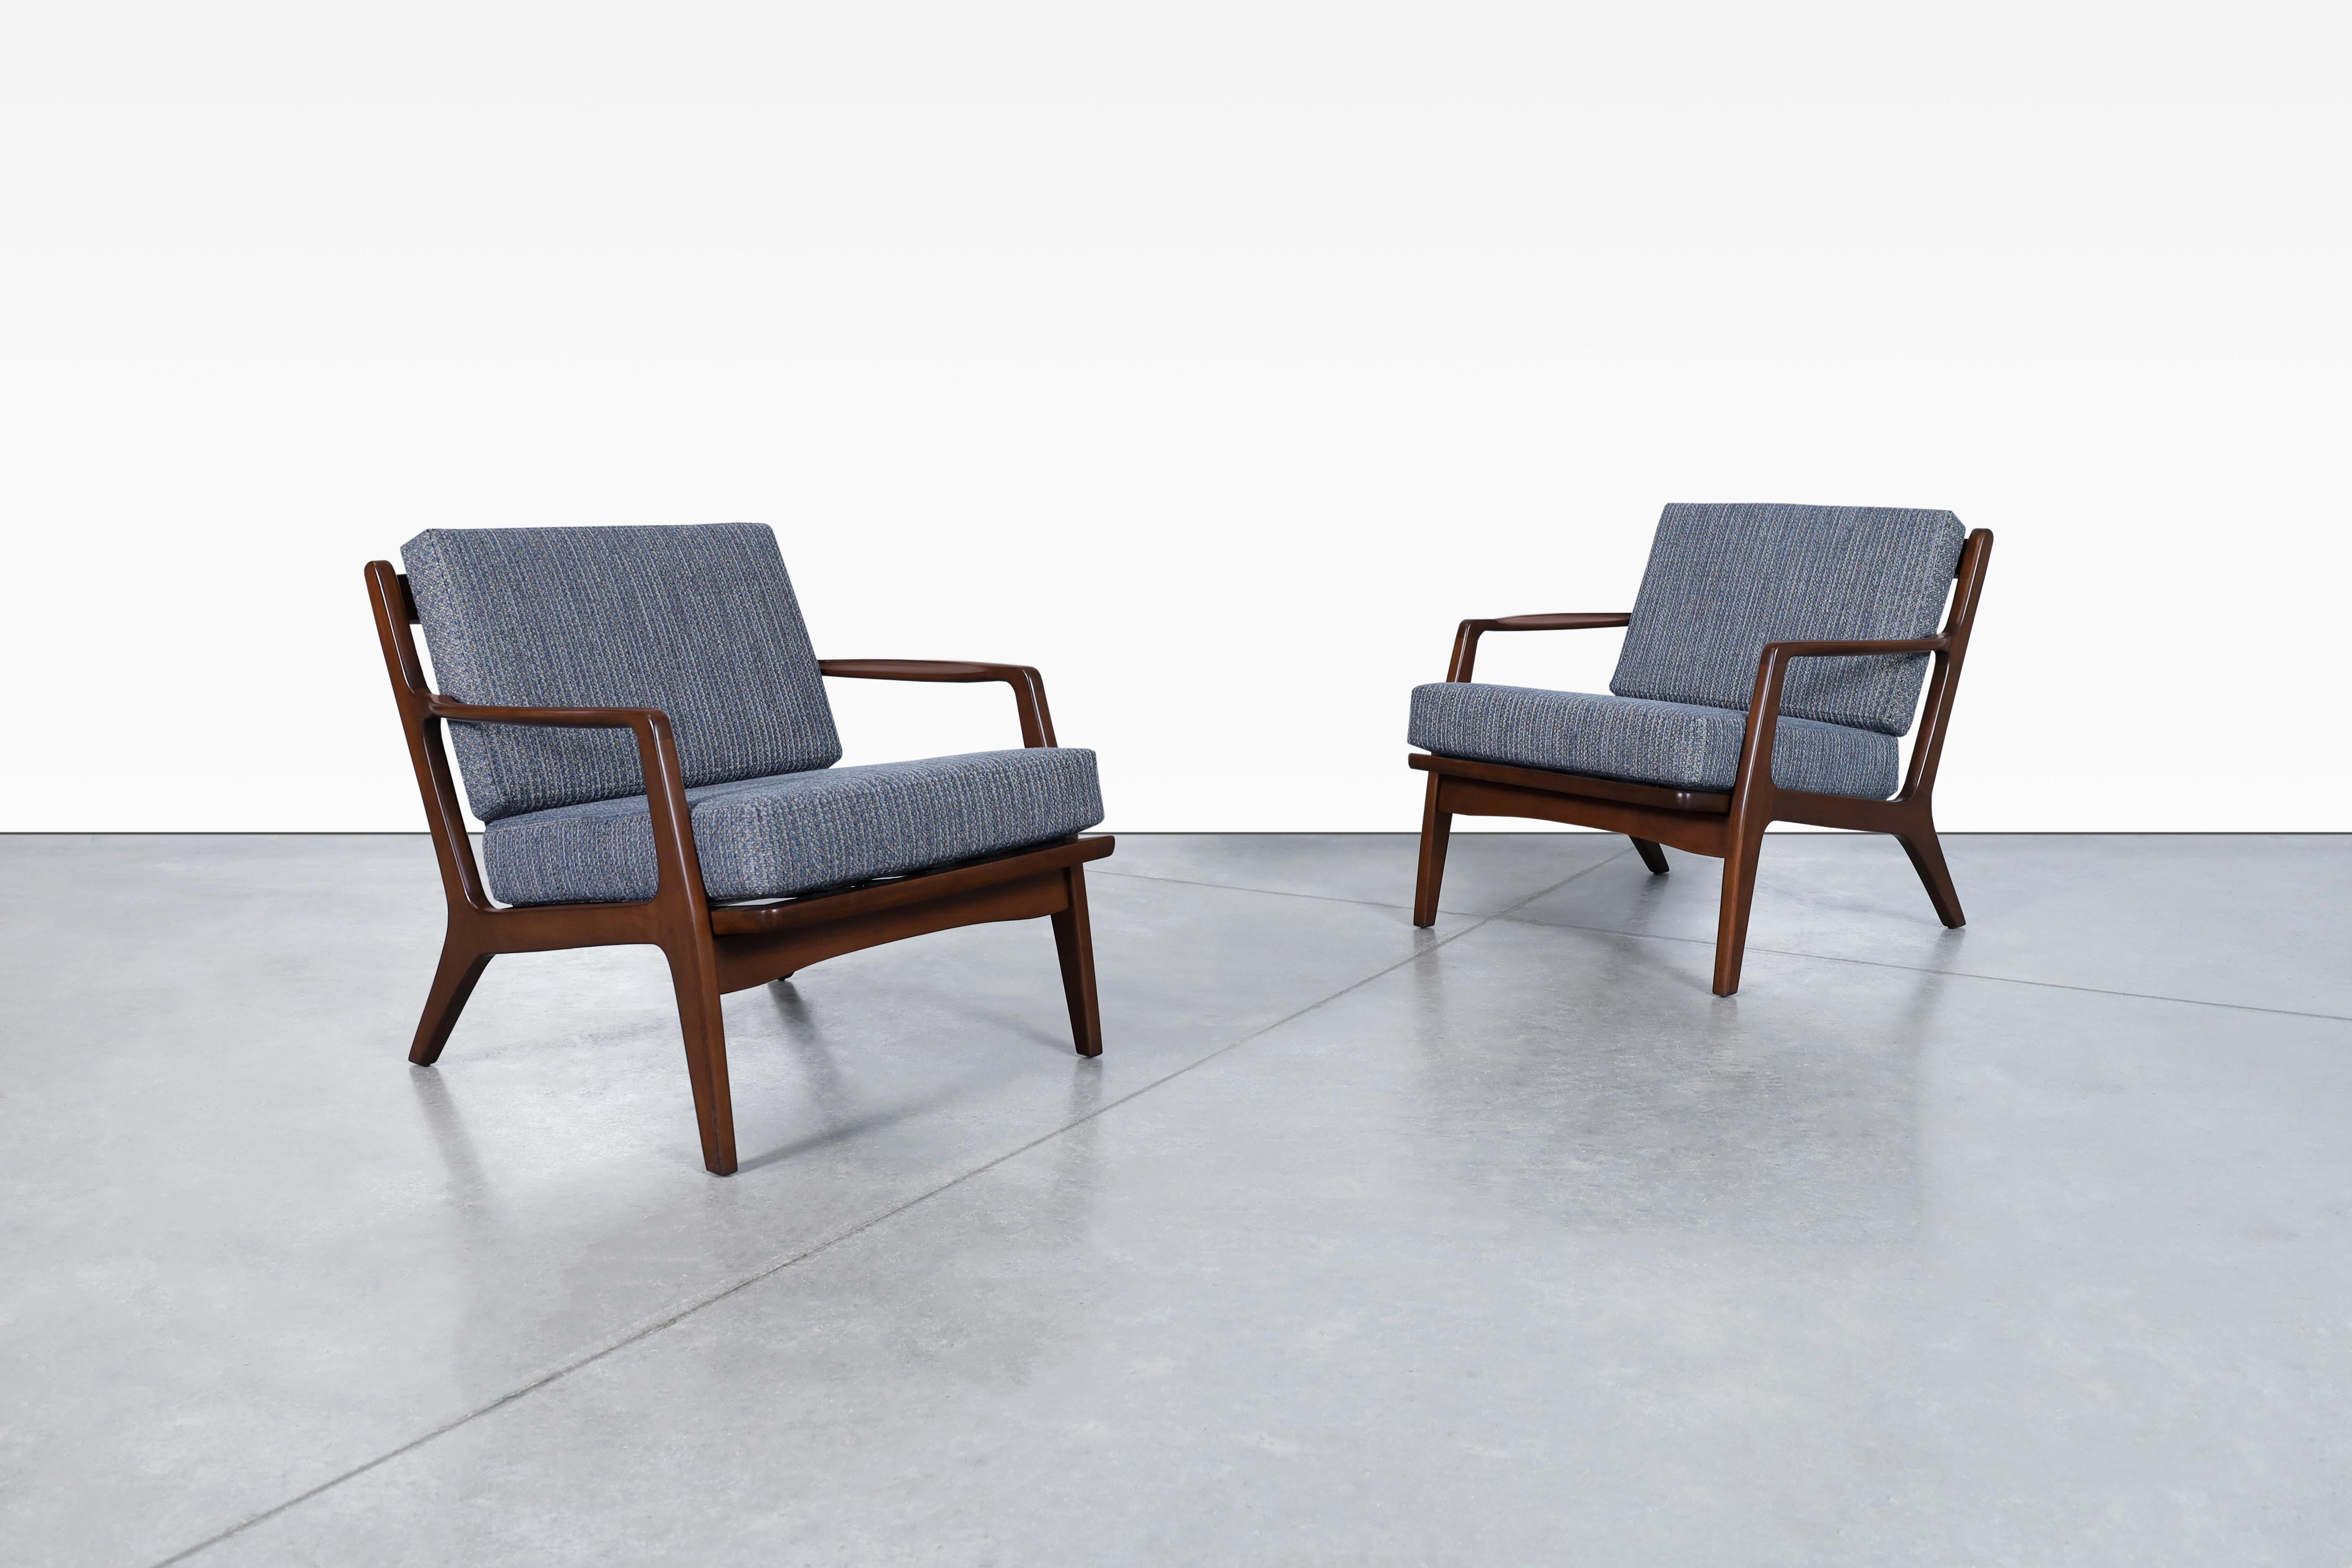 Stunning Danish modern walnut lounge chairs designed by the iconic Danish designer Ib Kofod-Larsen for Selig in Denmark, circa 1960s. These chairs are truly stunning! The solid walnut frame is expertly crafted to create a sleek and elegant profile